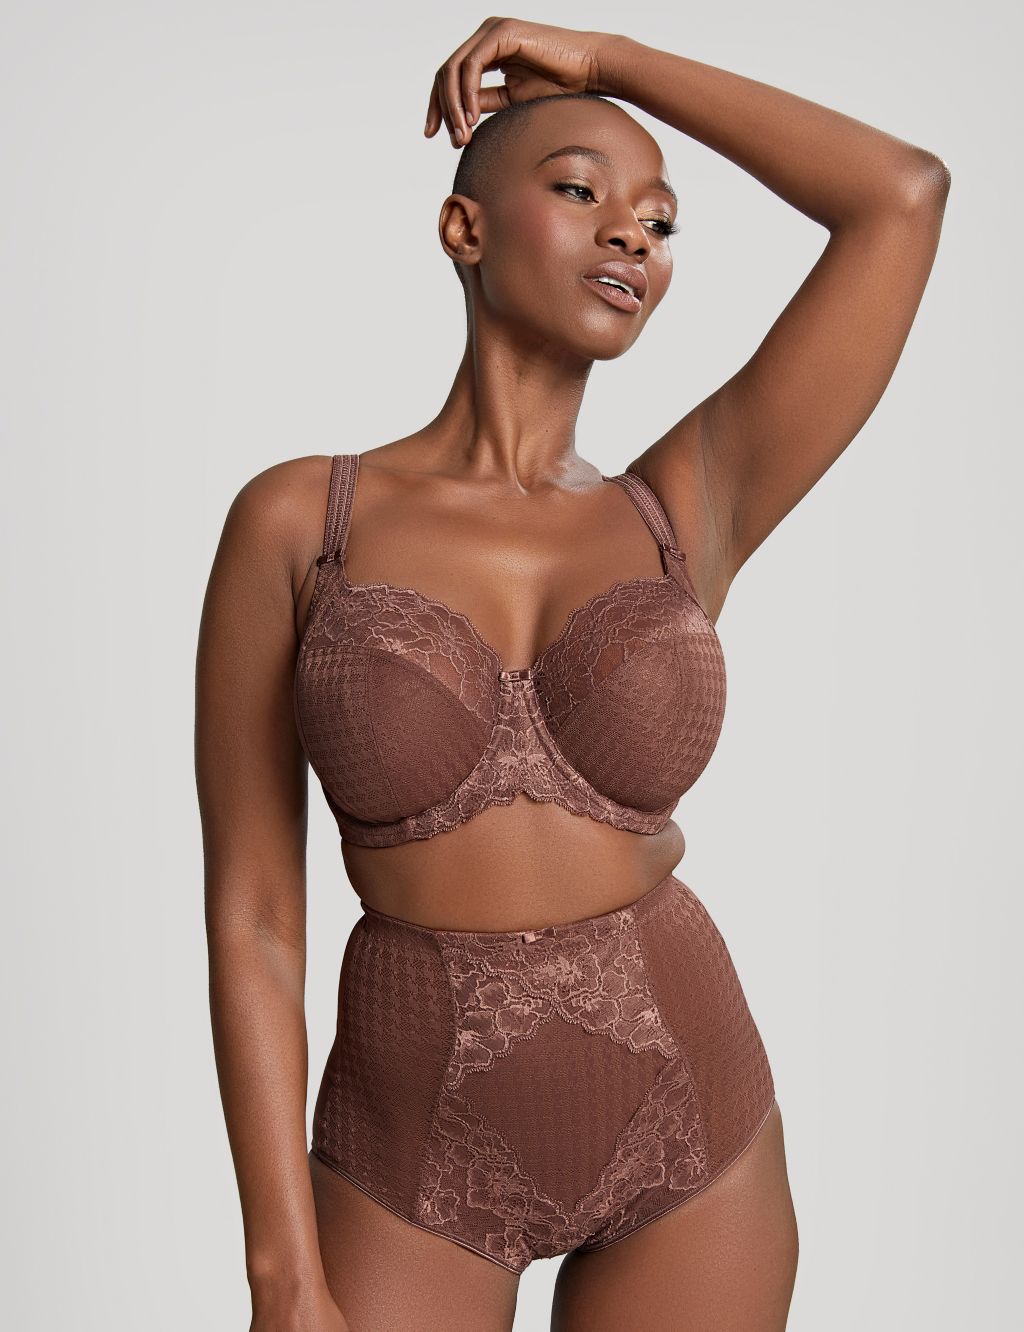 Envy Wired Full Cup Bra D-K image 1